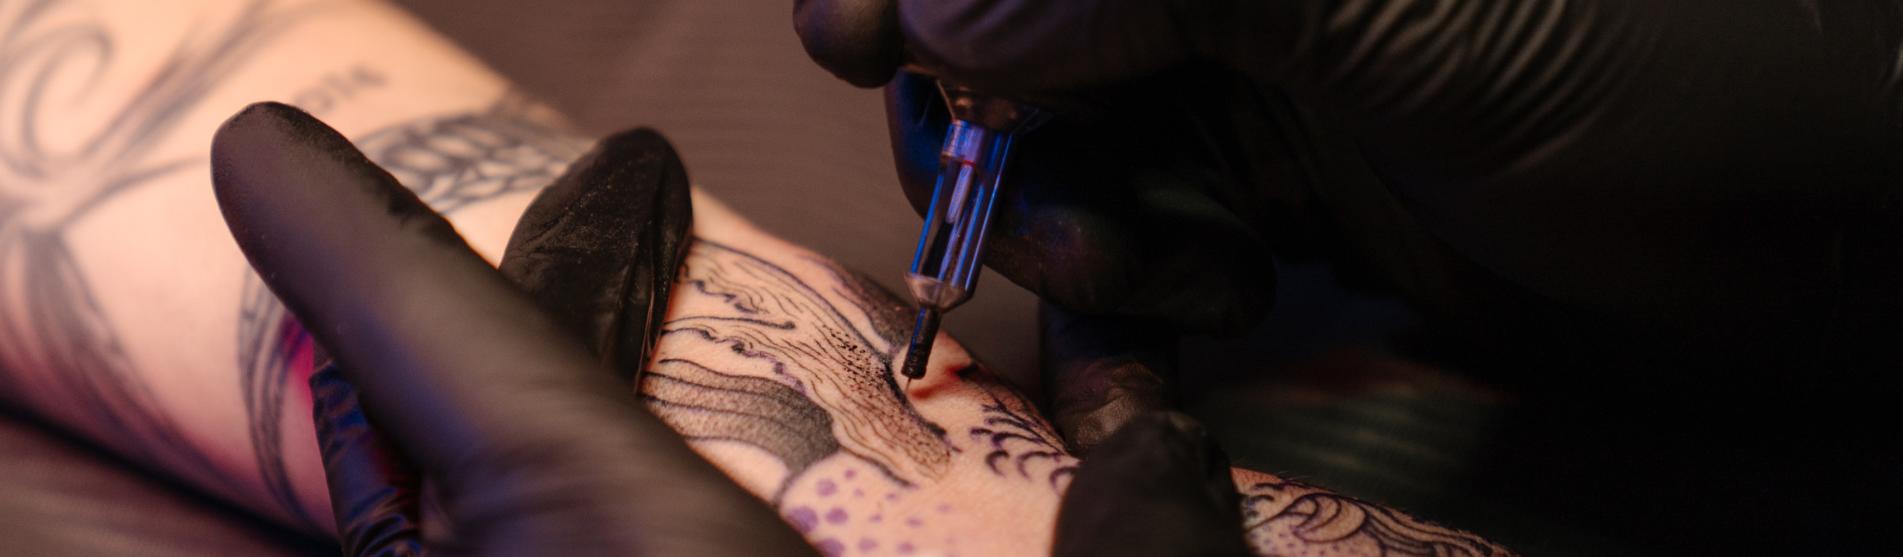 Tattoo City Convention continues through the weekend in Flint  WEYI